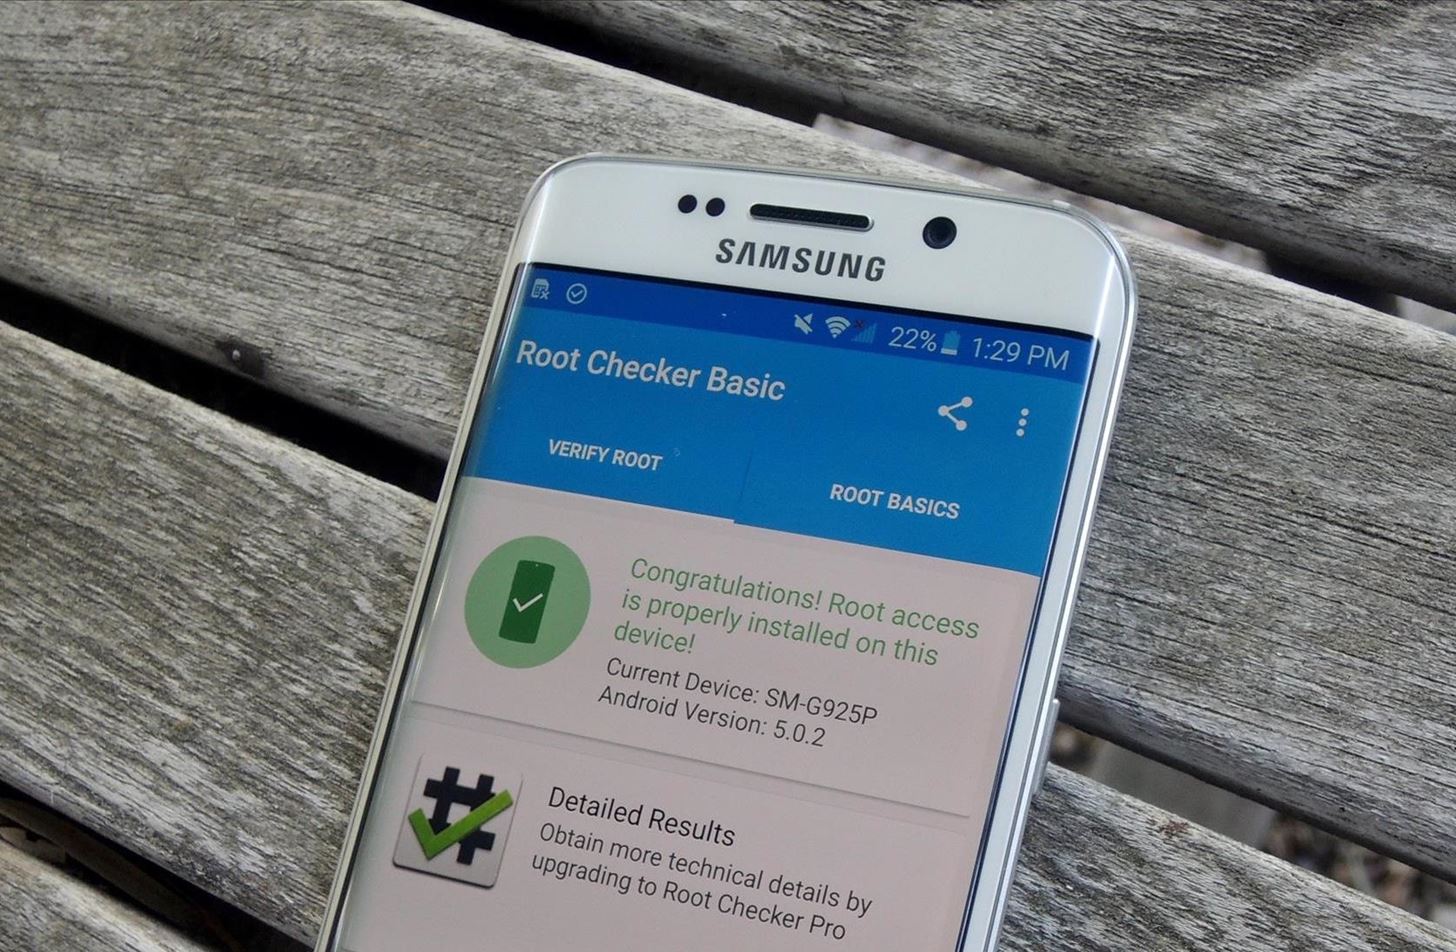 How to Root the Samsung Galaxy S6 & S6 Edge